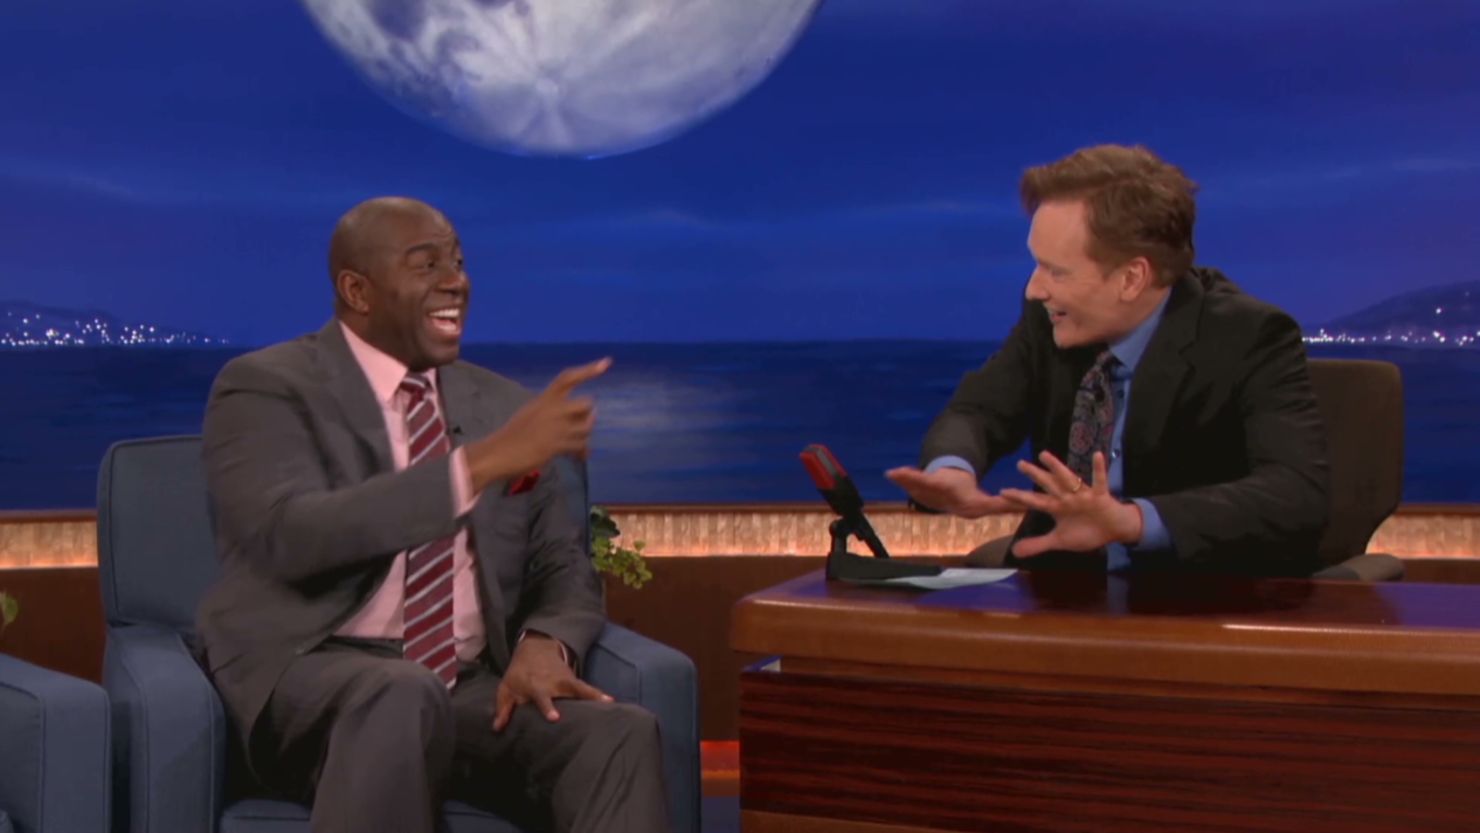 Magic Johnson was one of Conan O'Brien's guests on his March 25 show.